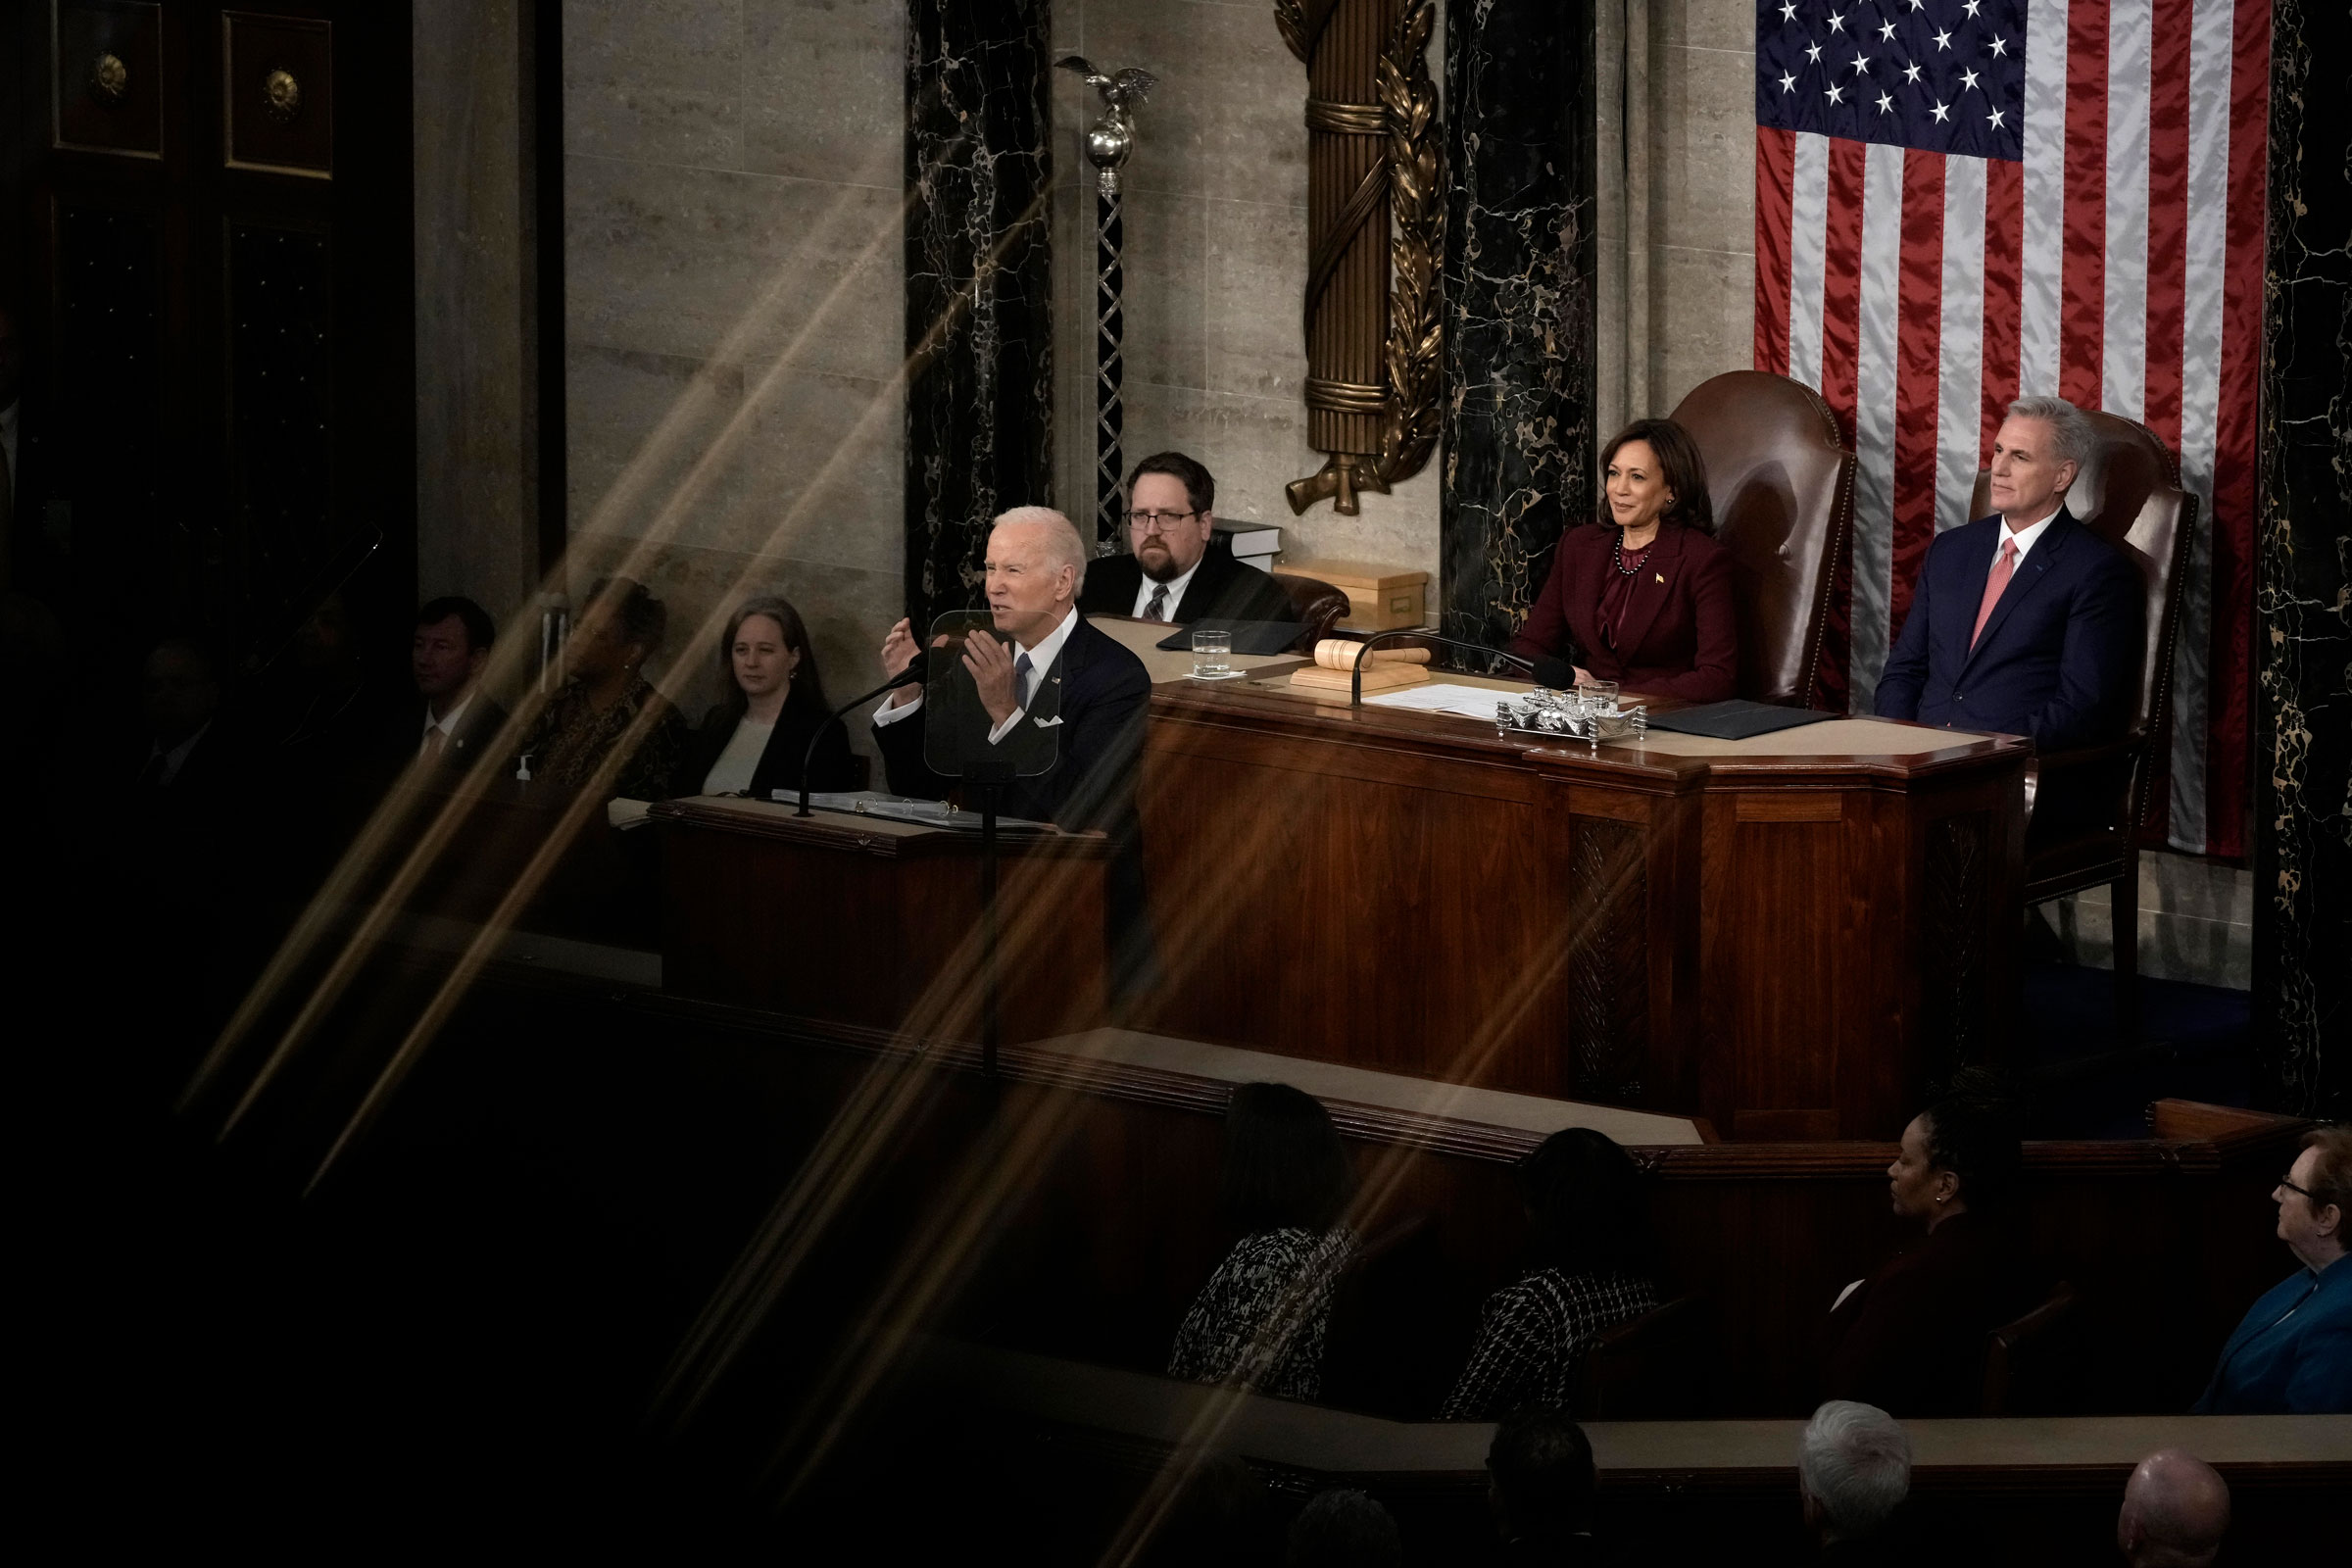 U.S. President Joe Biden delivers his State of the Union address during a joint meeting of Congress in the House Chamber of the U.S. Capitol in Washington, D.C., on Feb. 7, 2023. (Drew Angerer—Getty Images)